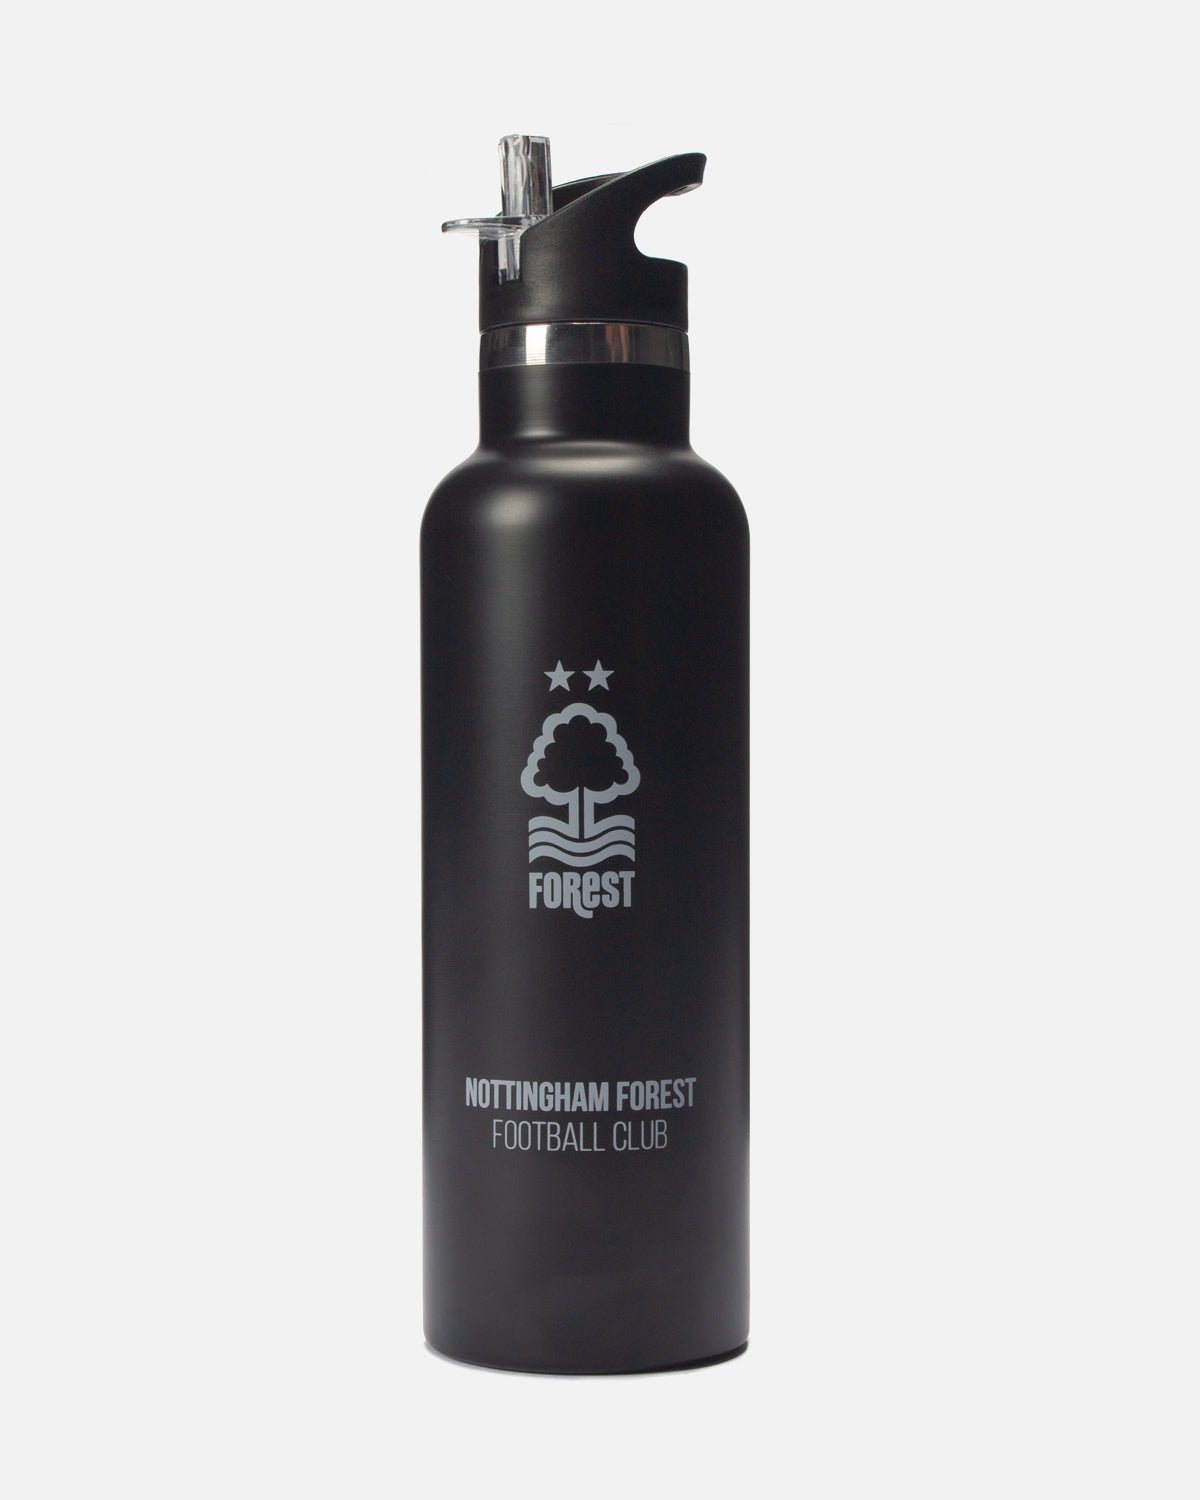 NFFC 750ml Black Stainless Steel Bottle with Straw - Nottingham Forest FC